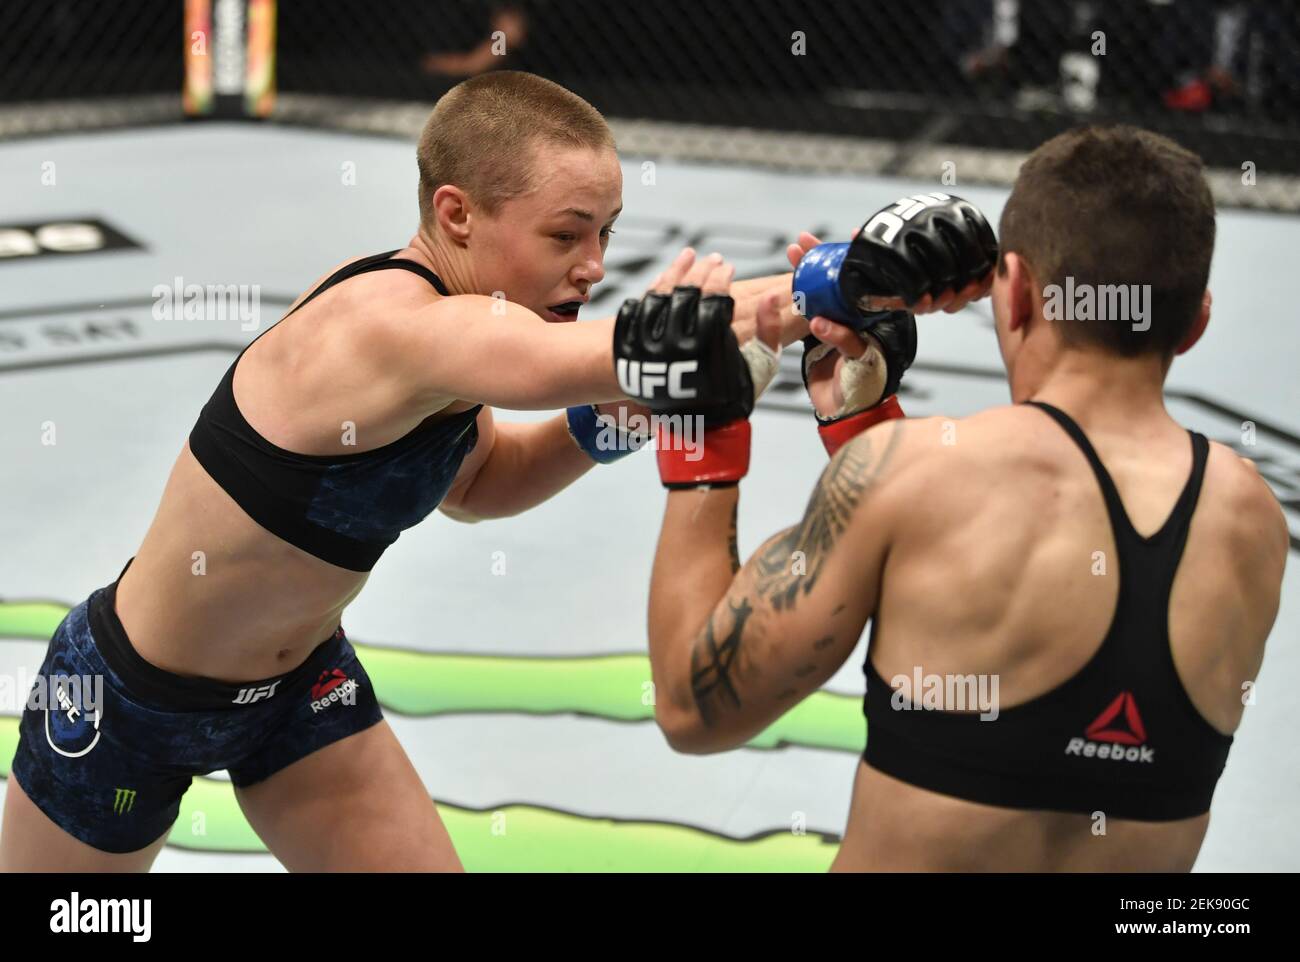 July 12 Abu Dhabi Uae Rose Namajunas Punches Jessica Andrade Of Brazil In Their Strawweight Fight During The Ufc 251 Event At Flash Forum On Ufc Fight Island On July 12